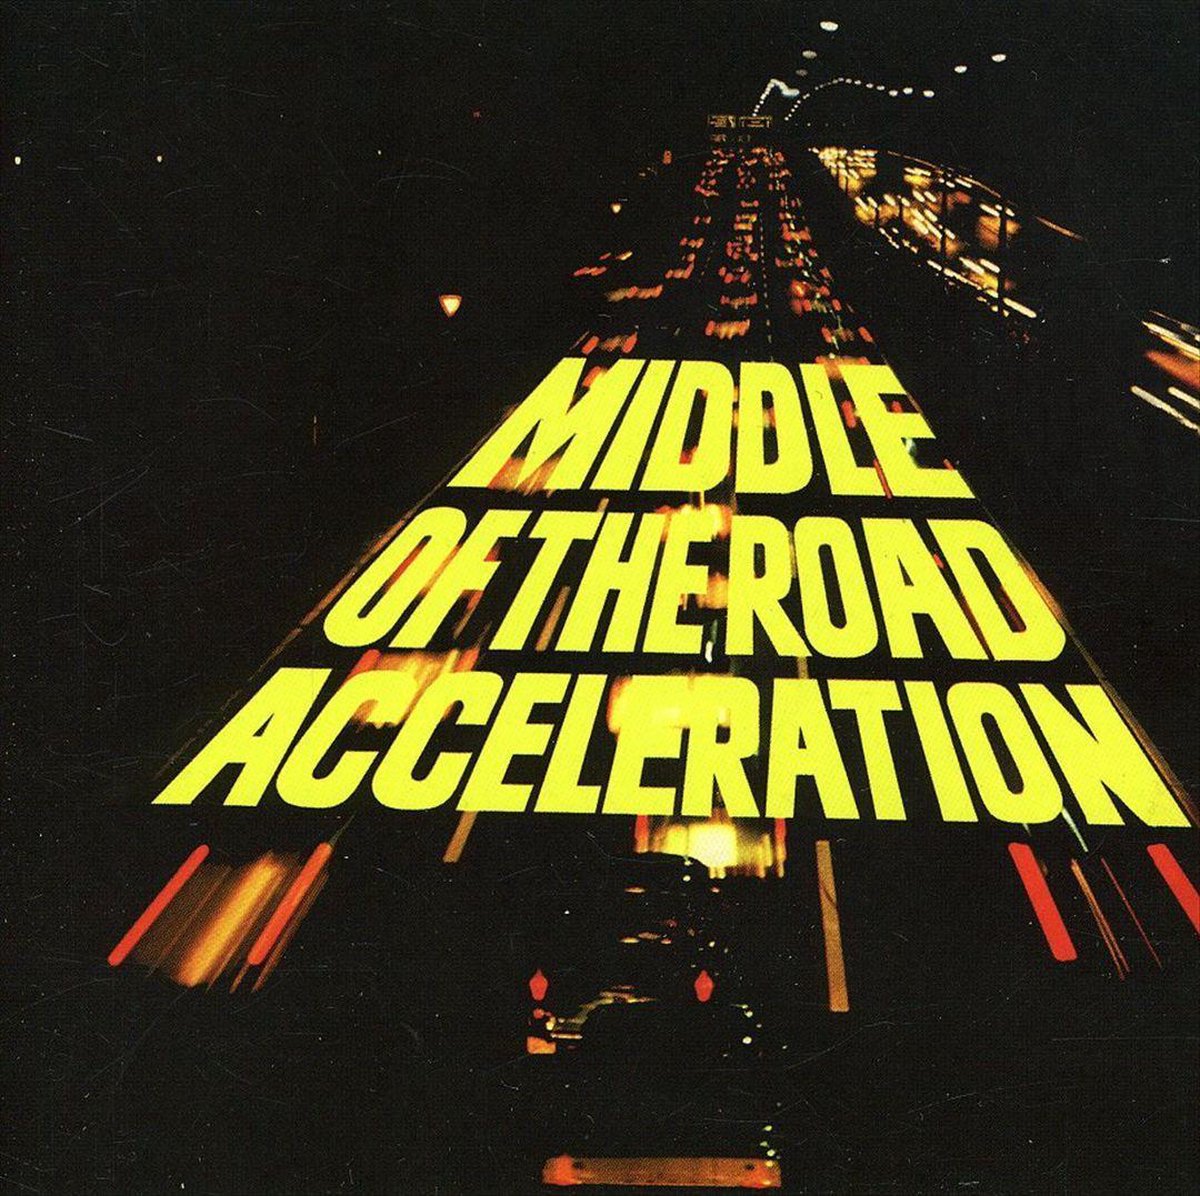 Acceleration - Middle Of The Road